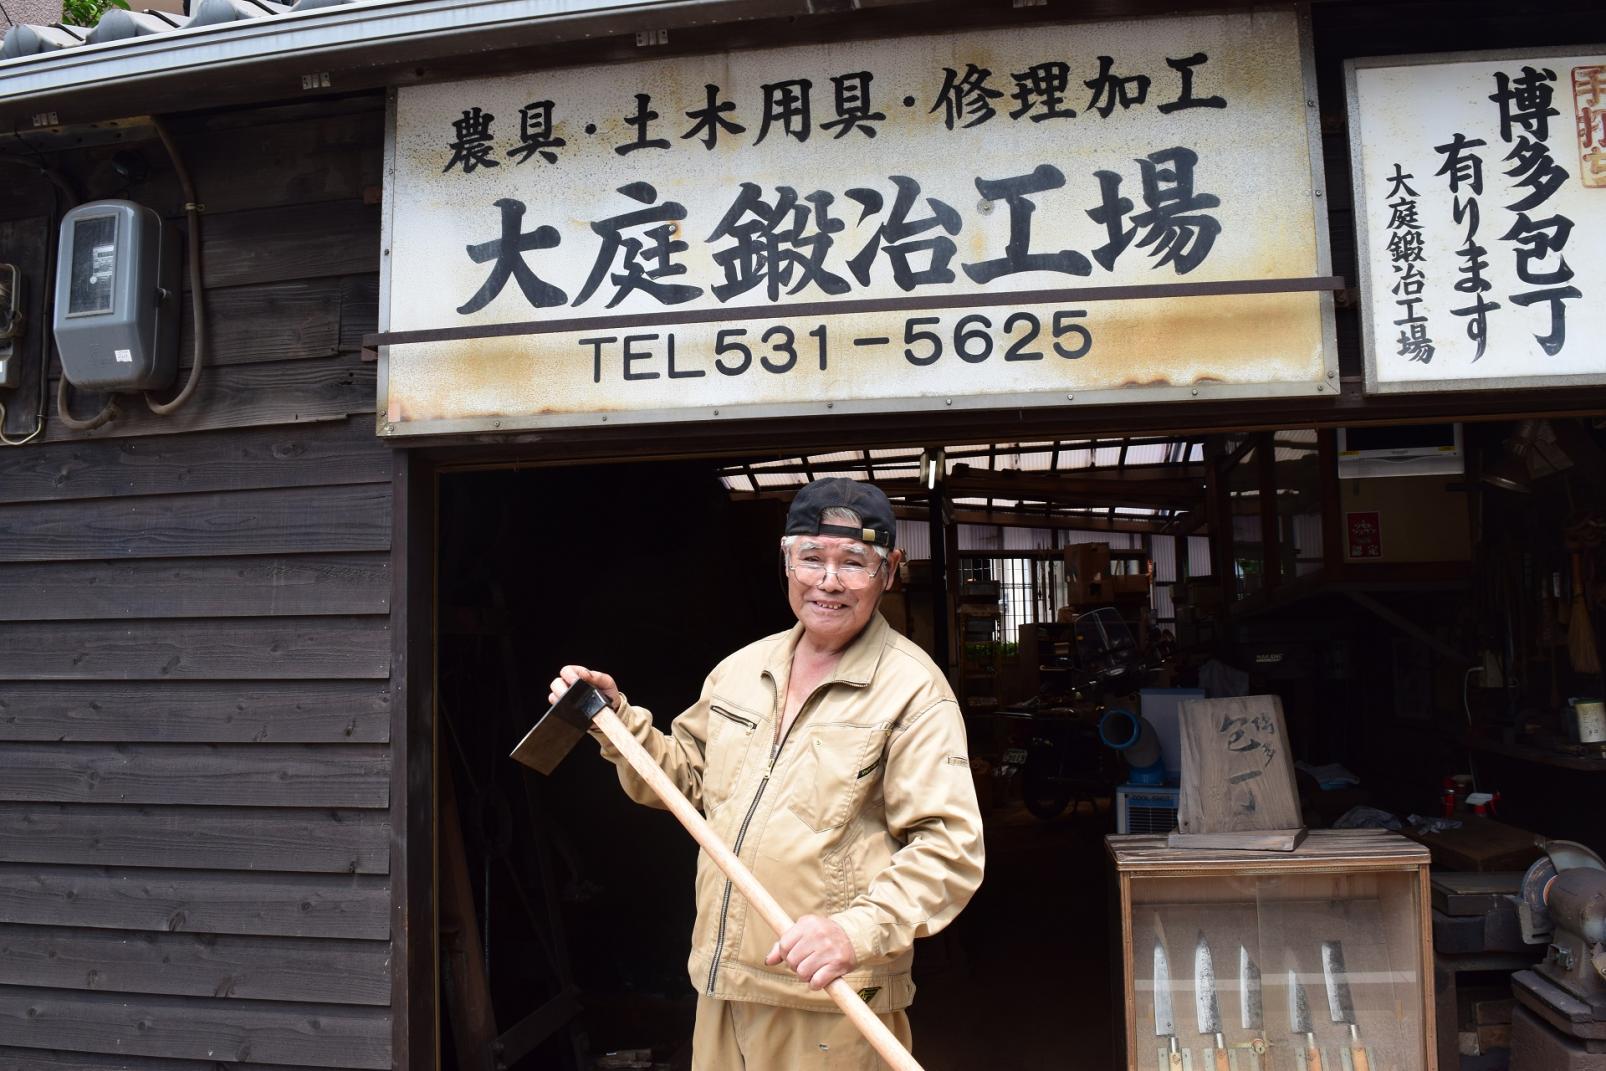 This is the only blacksmith workshop in the country which makes the tool for preparing the surface of the sumo wrestling ring